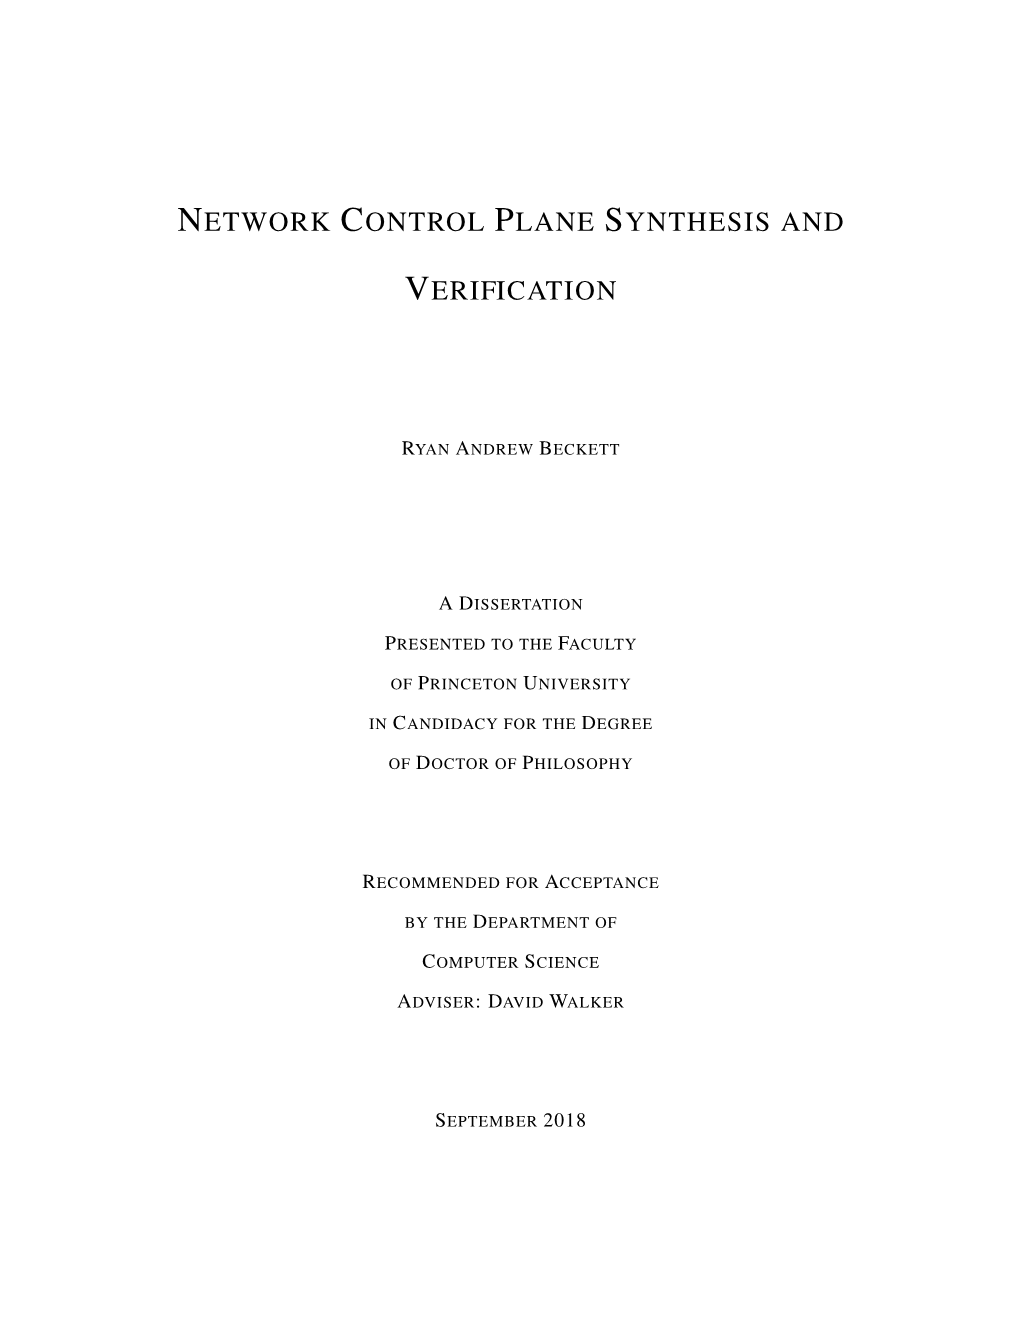 Network Control Plane Synthesis and Verification